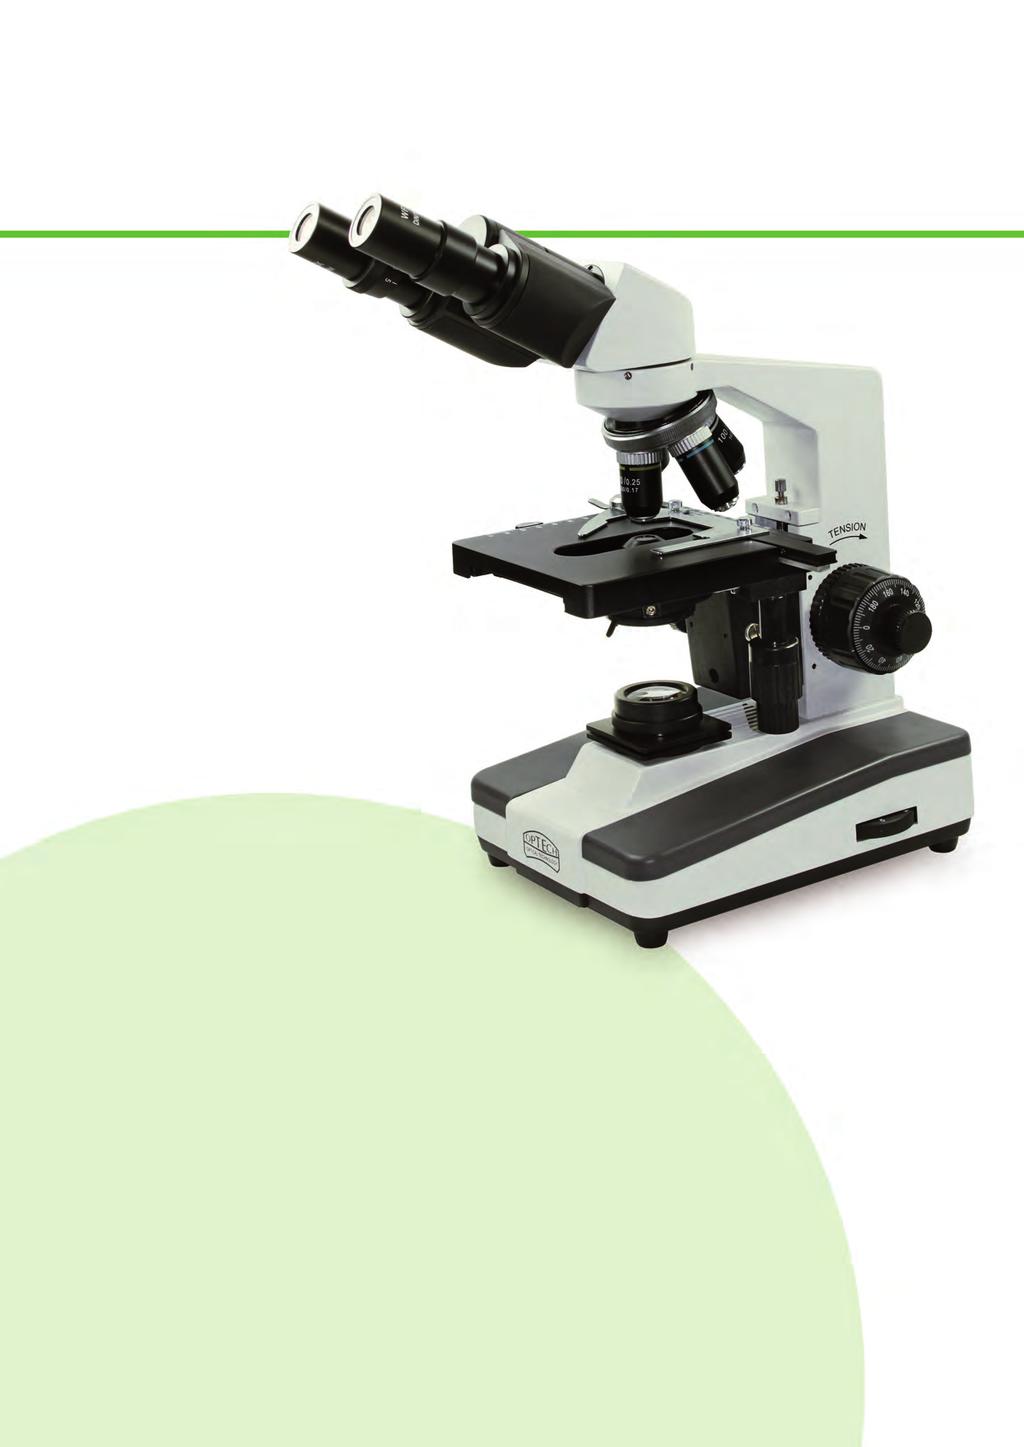 Optech microscopes Biostar B3 Biological microscope for lab basic analysis and basic didactic training.